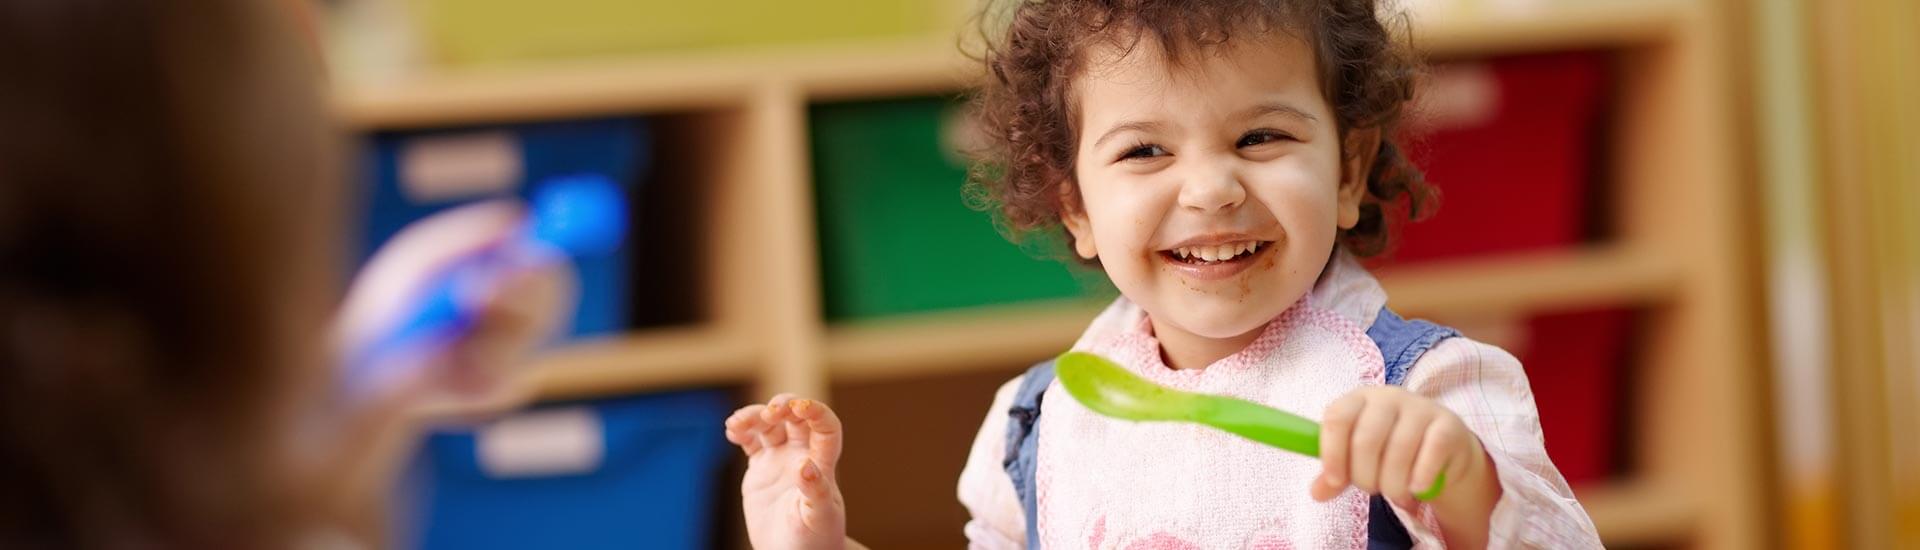 Considering Child Care Aid: Make the Right Decision